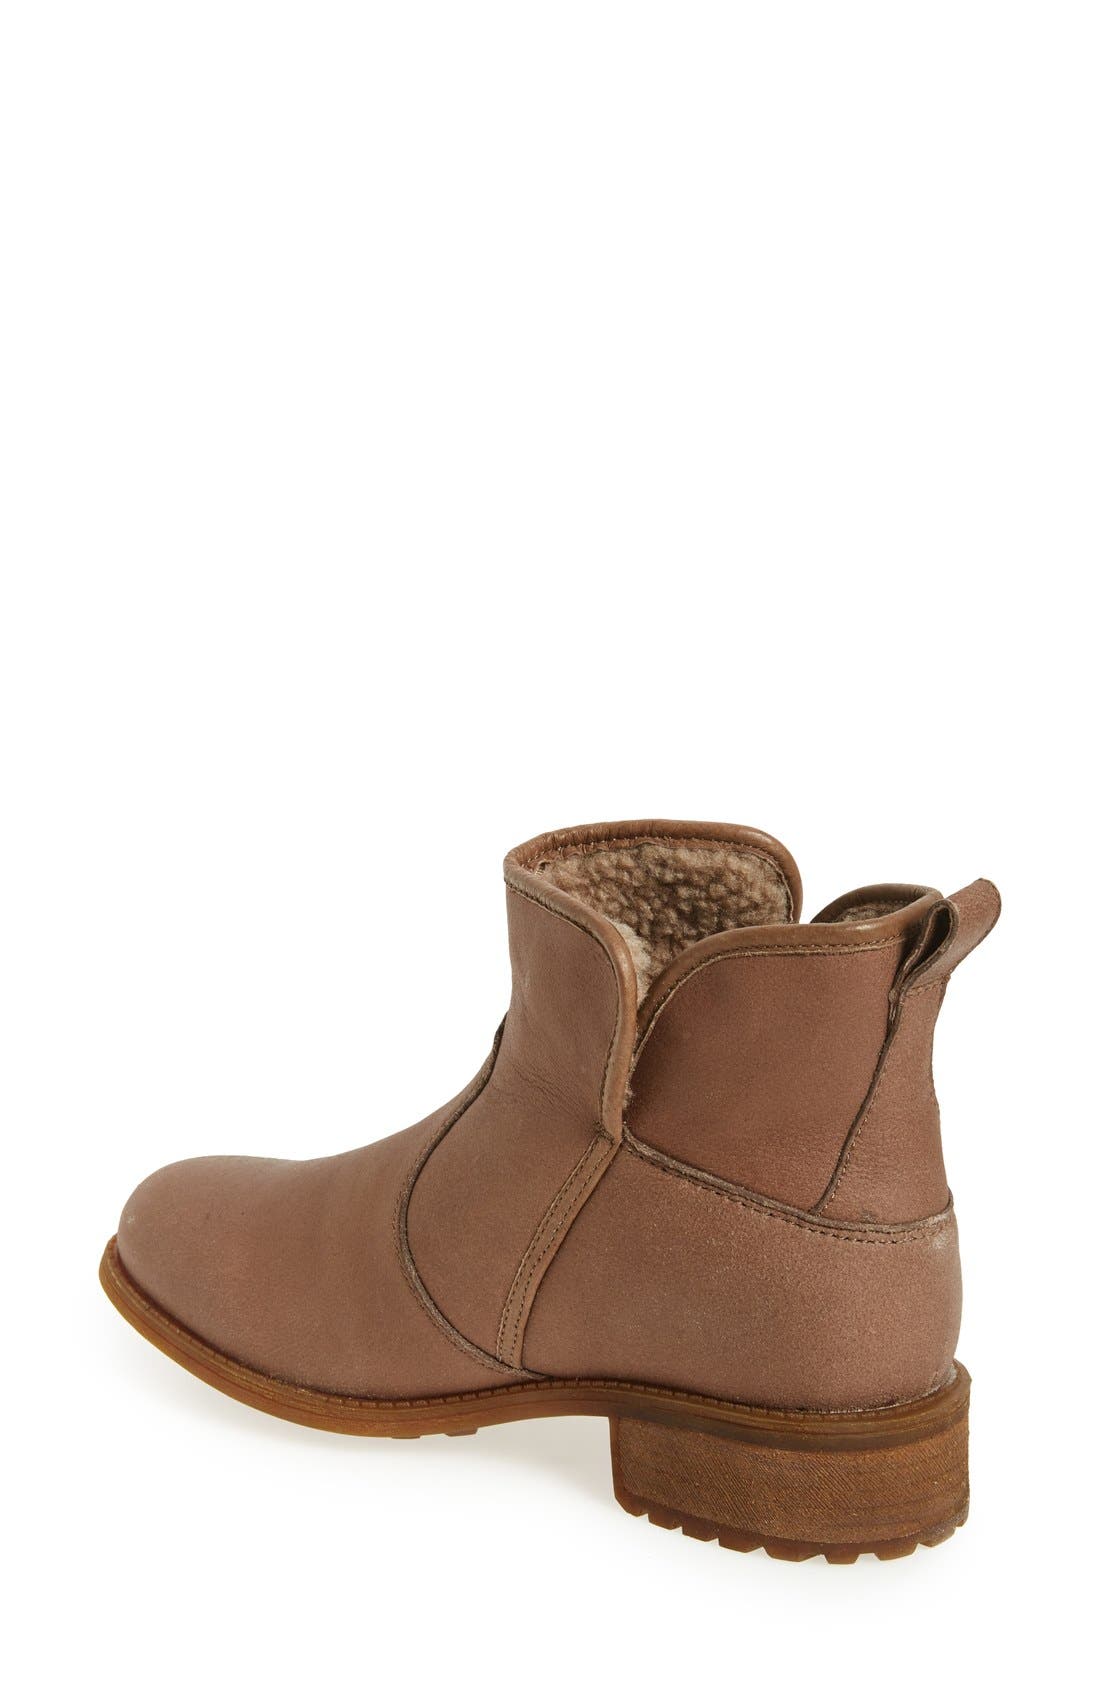 lavelle ugg boots